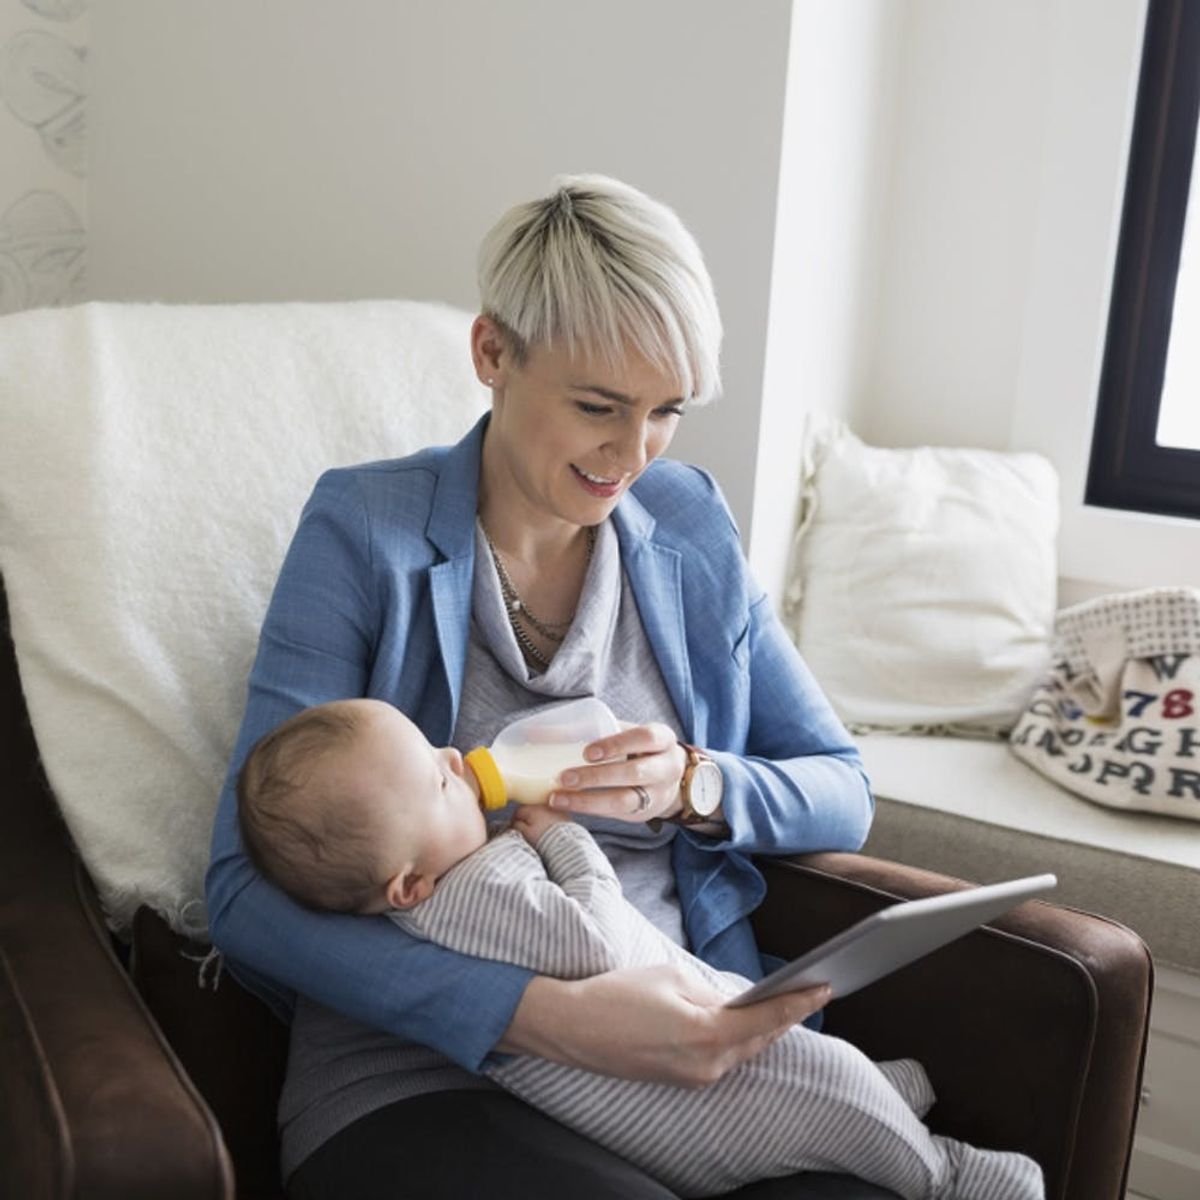 7 Tips for Breastfeeding When You Go Back to Work